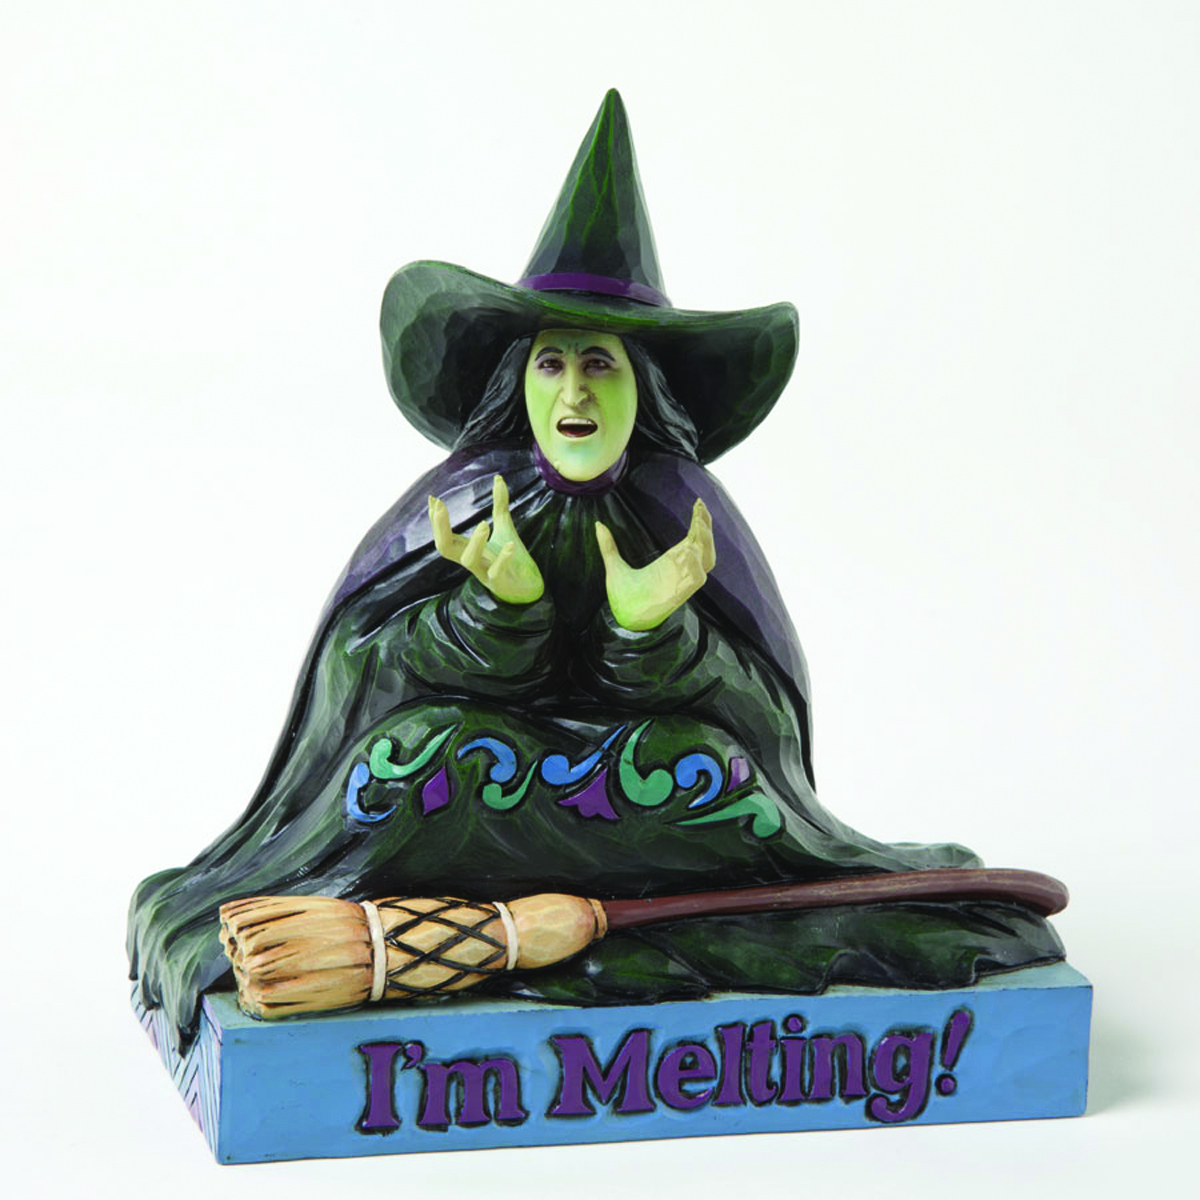 "I'm melting!" screeches the Wicked Witch of the West as Dor...